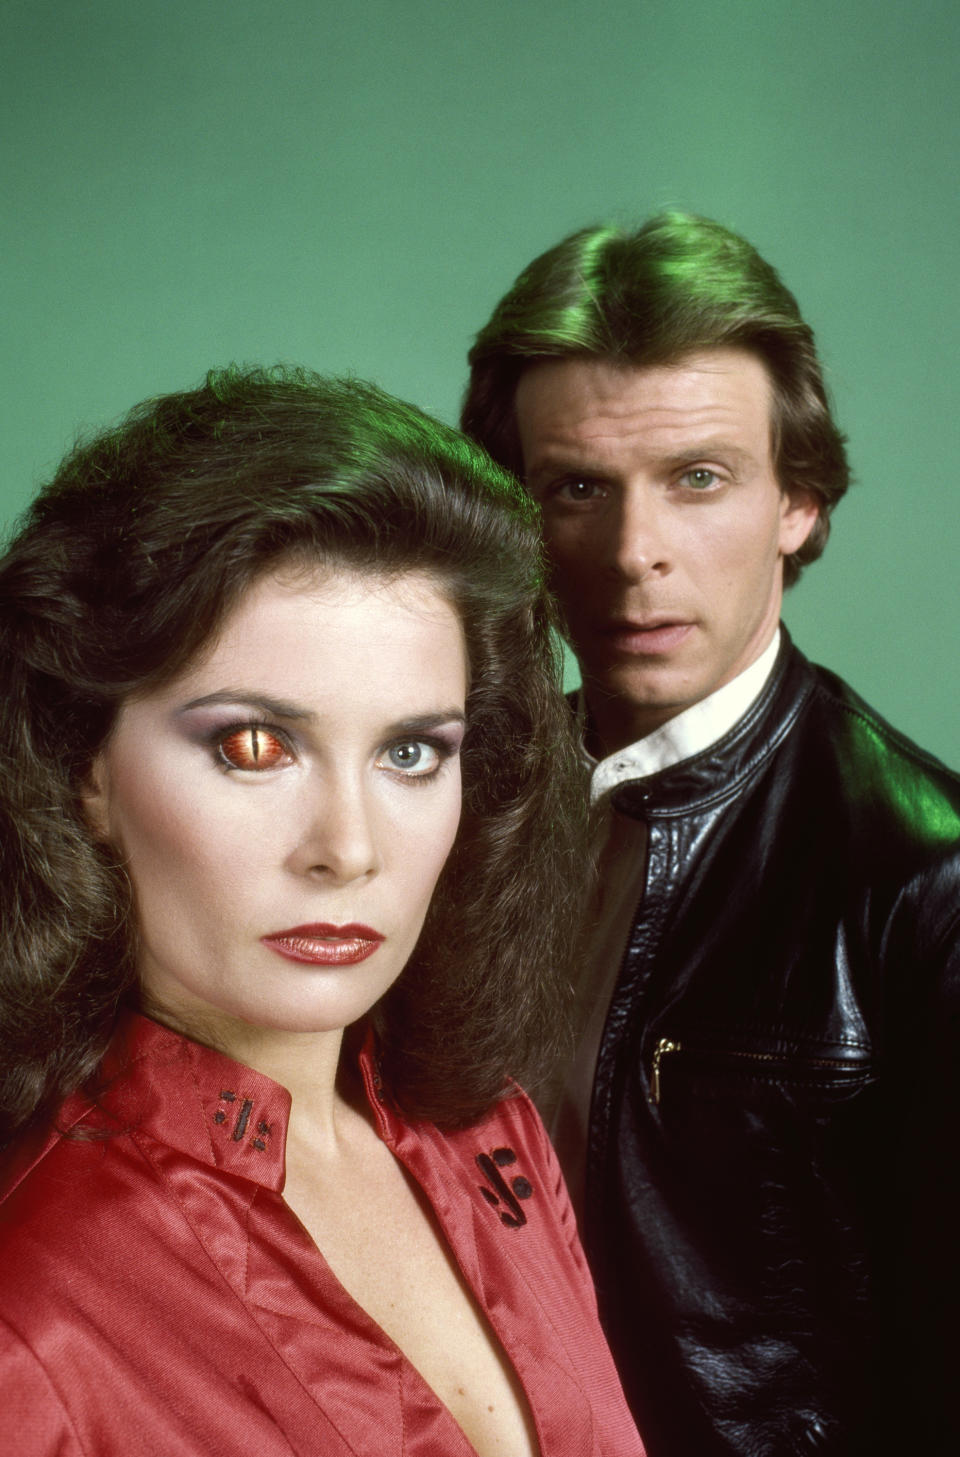 V -- Pictured: (l-r) Jane Badler as Diana, Marc Singer as Mike Donovan  (Photo by Herb Ball/NBCU Photo Bank/NBCUniversal via Getty Images via Getty Images)